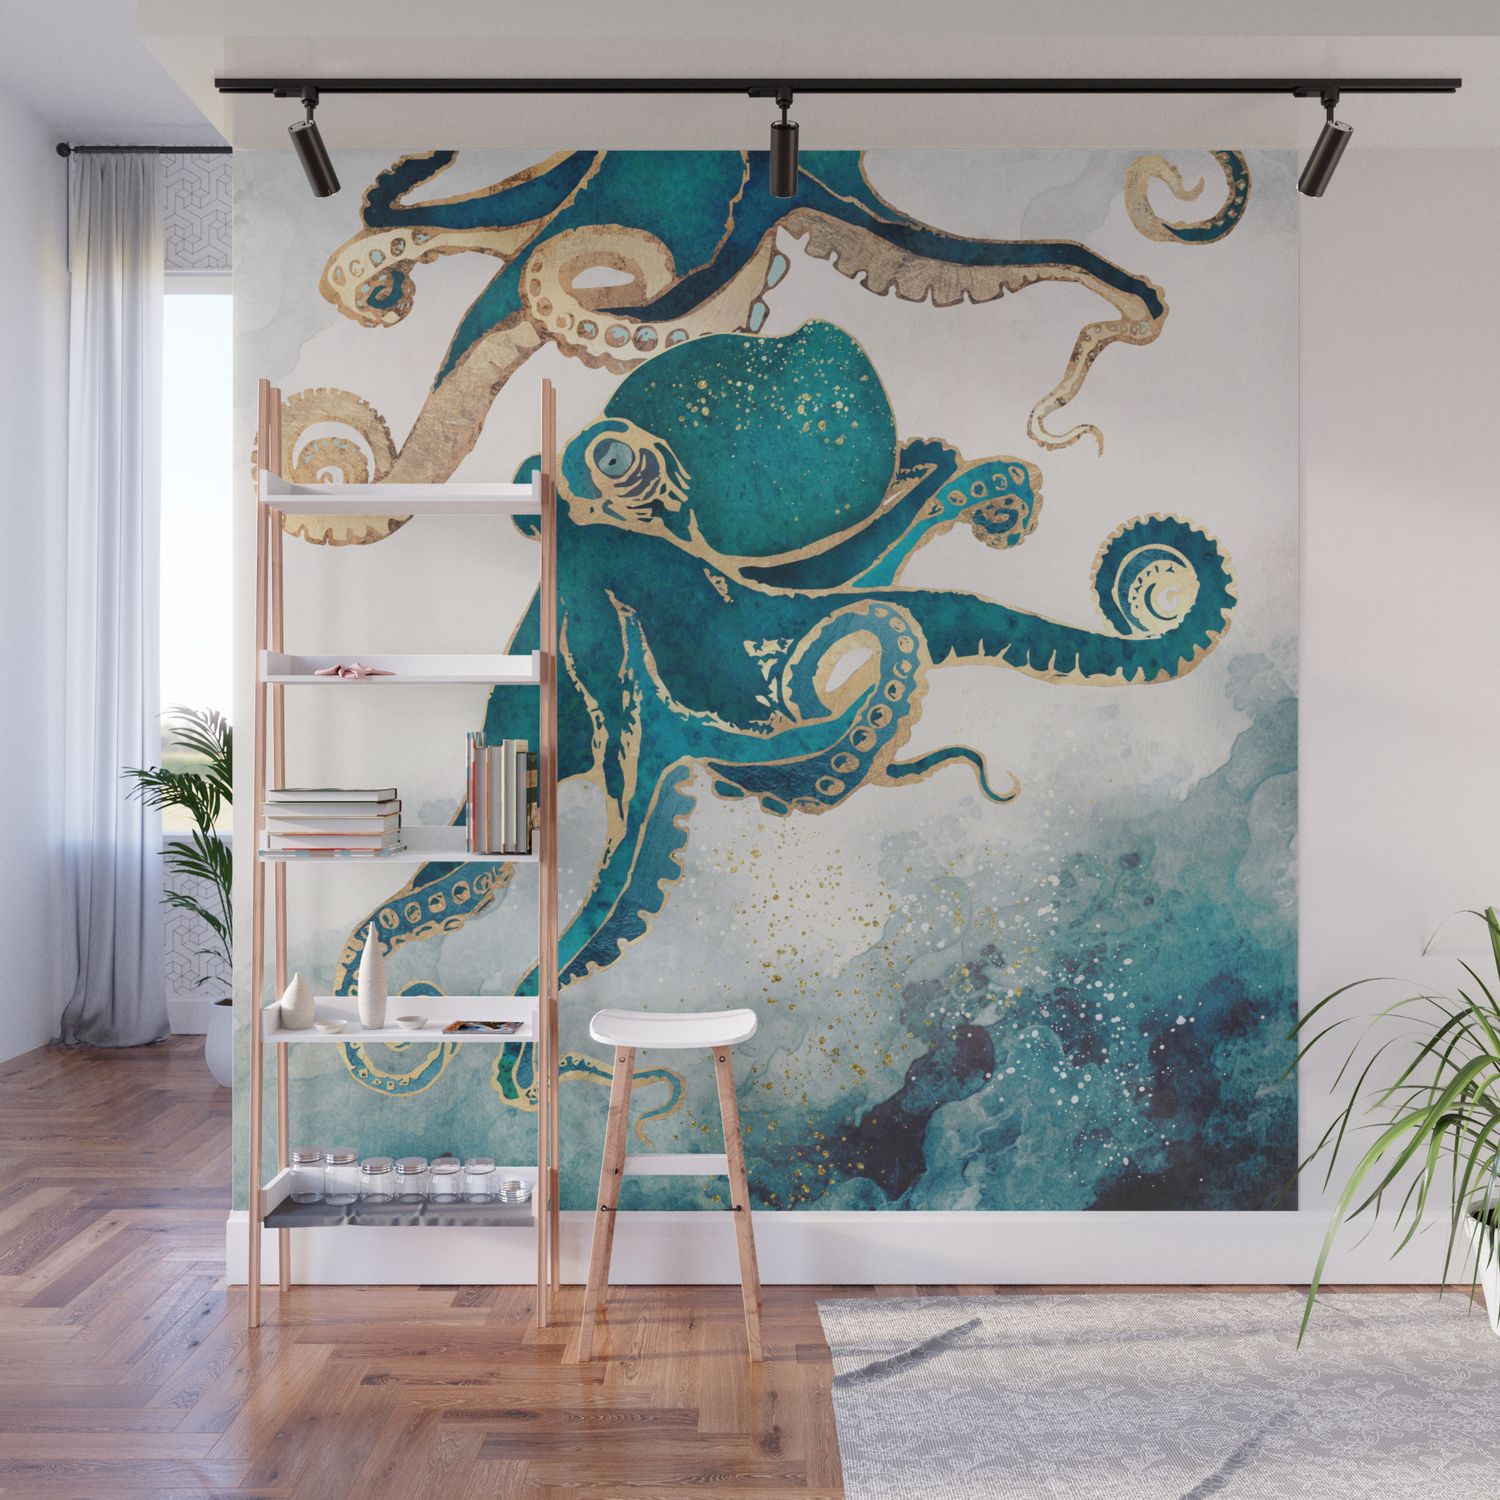 Society6 With Regard To Well Known Underwater Wall Art (View 11 of 15)